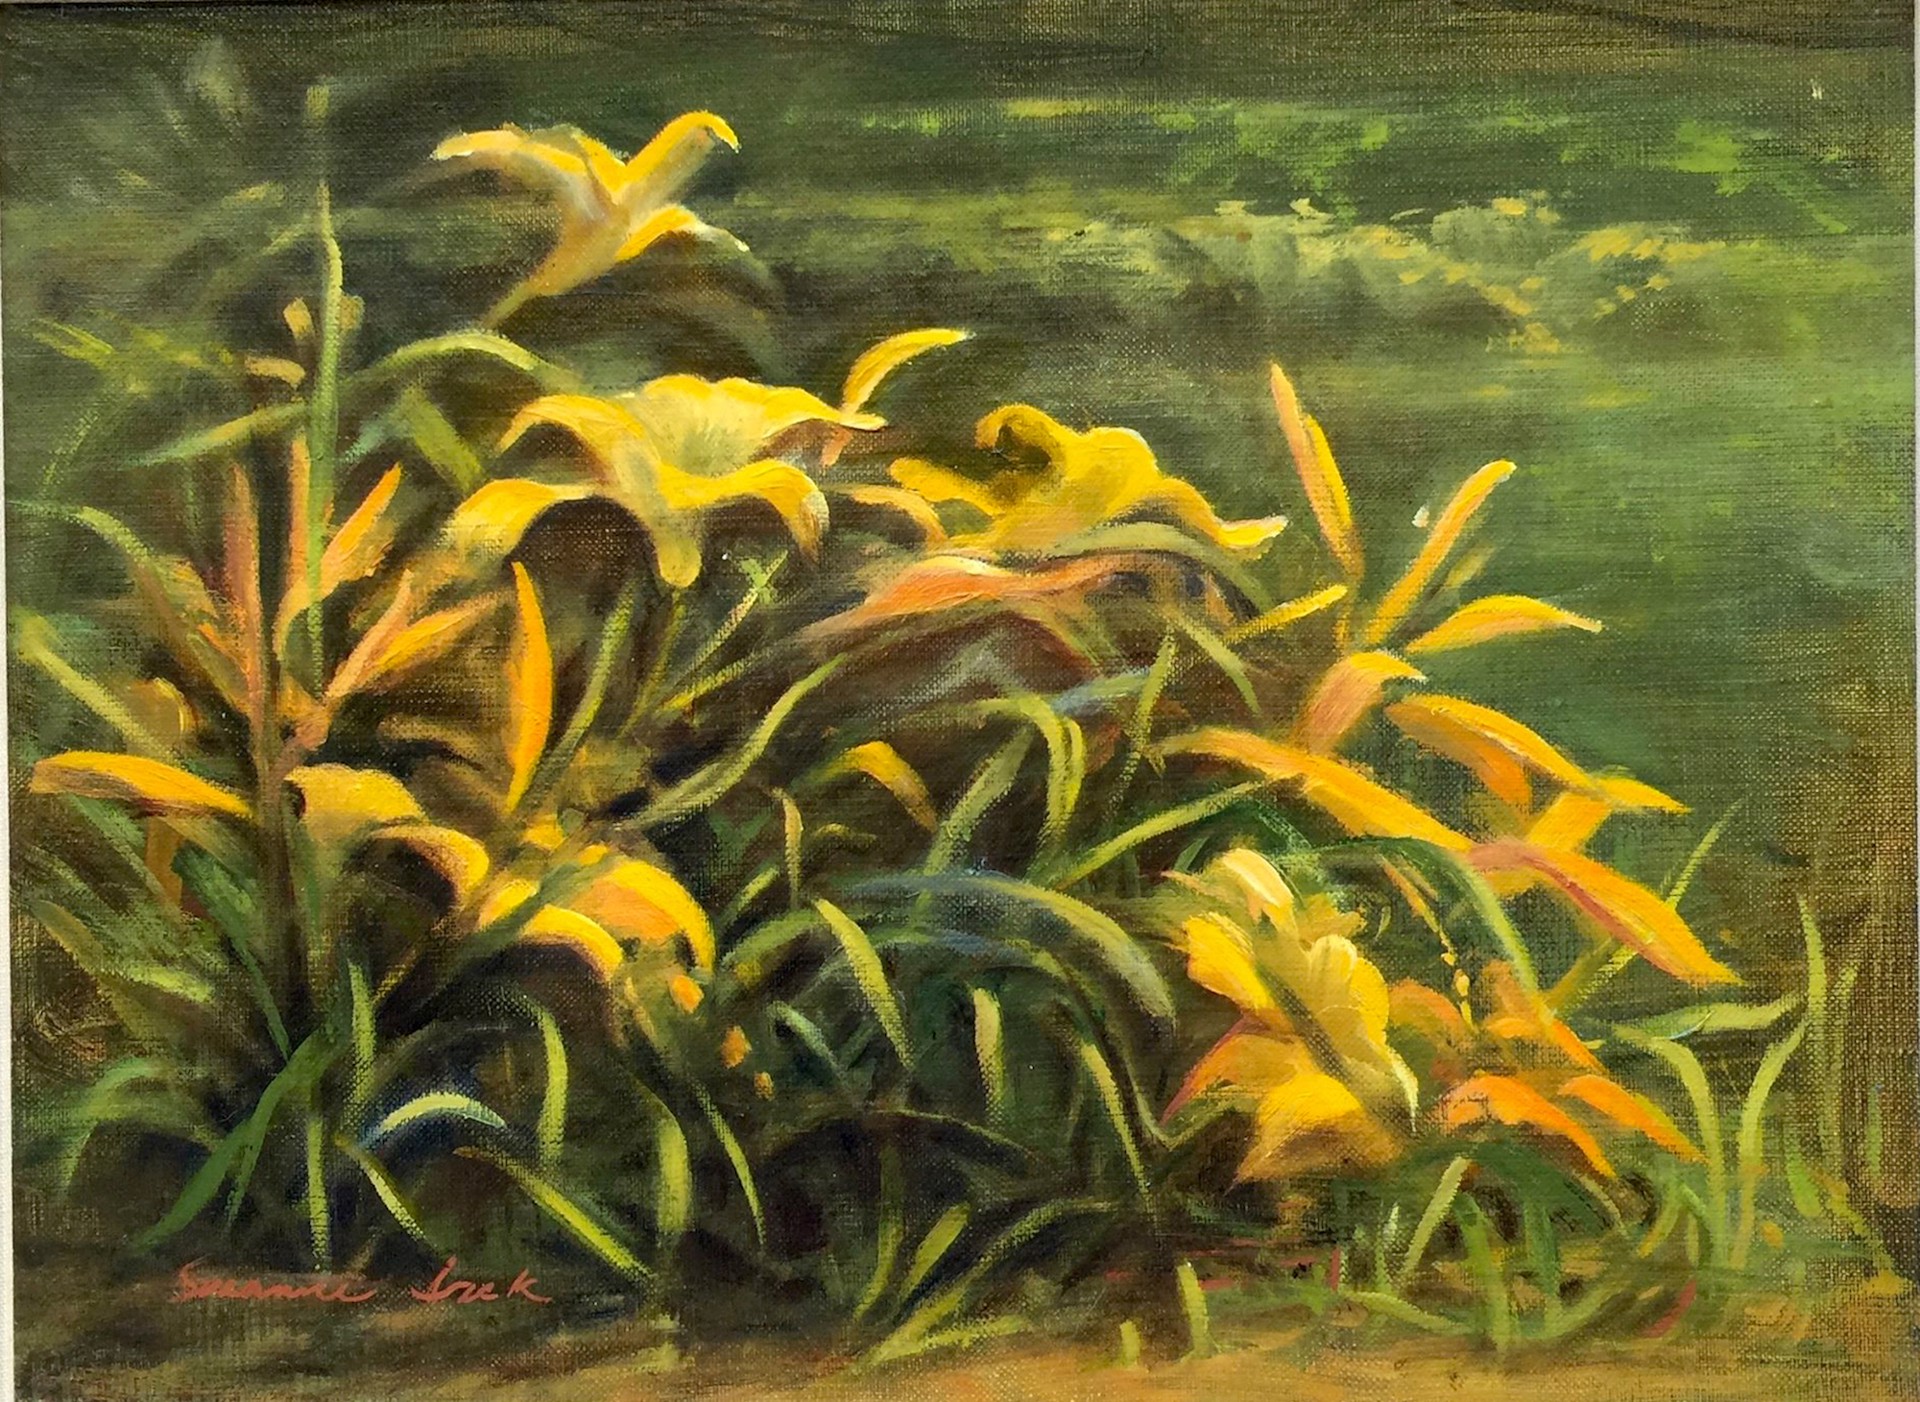 Oakes Award Winning Lilies by Suzanne Jack